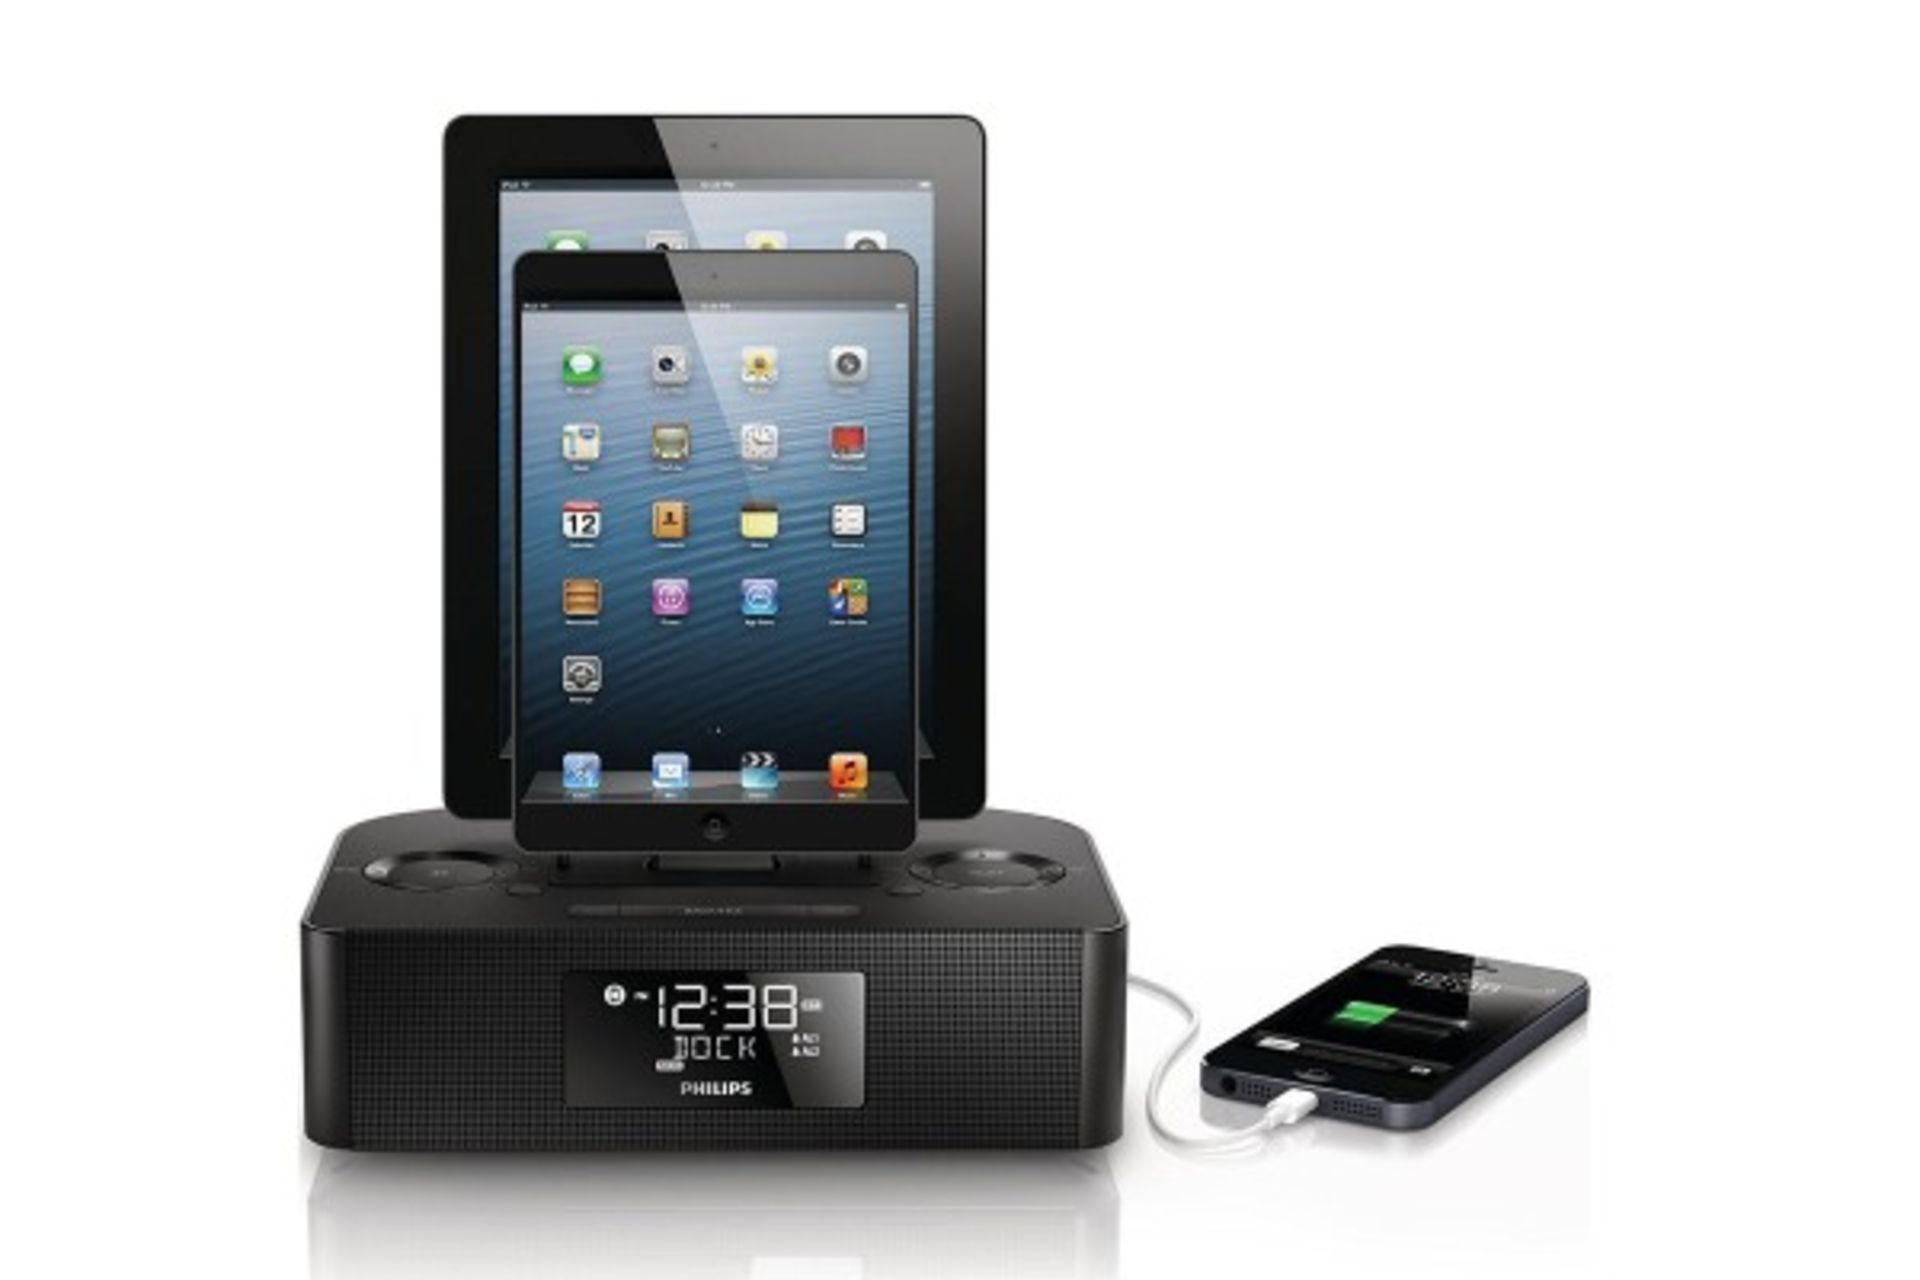 V Grade A Philips Dual Dock Triple Charging Clock Radio For Apple iPod iPhone And iPad Includes